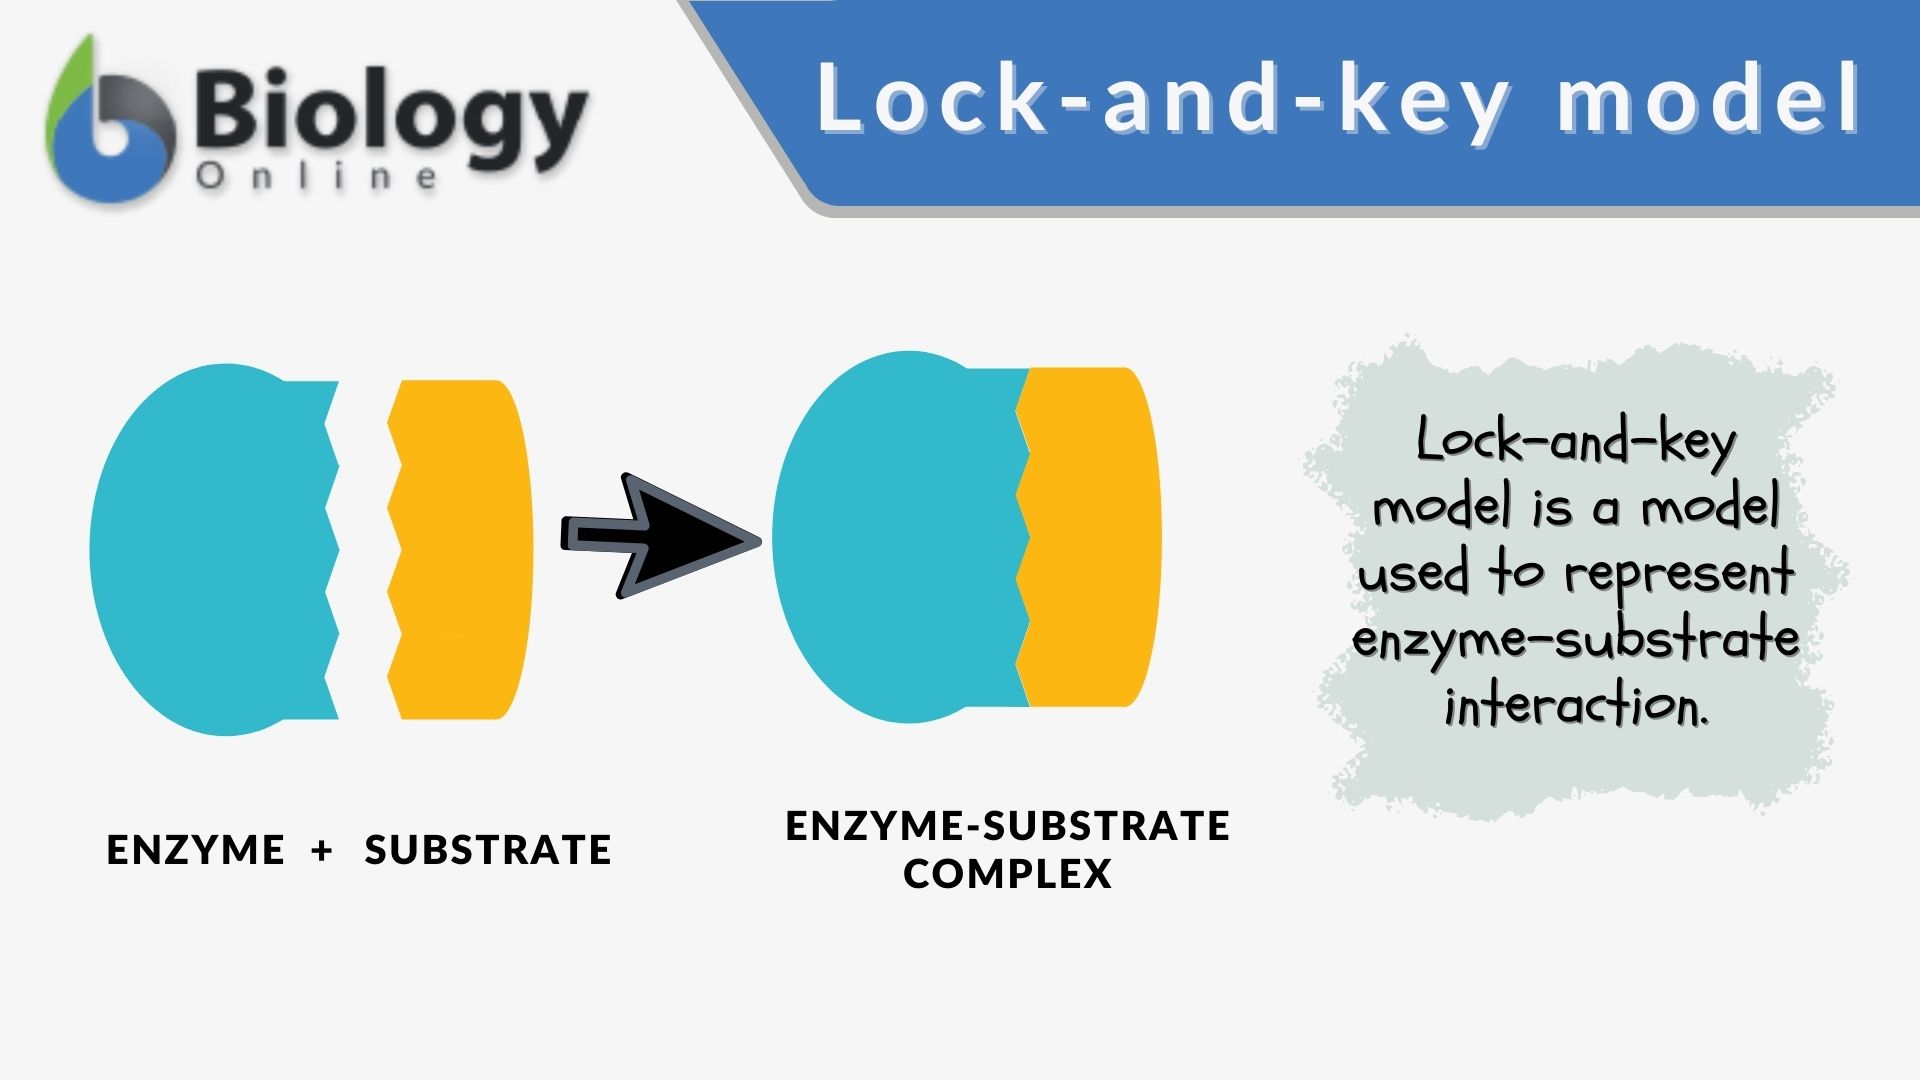 https://www.biologyonline.com/wp-content/uploads/2019/10/Lock-and-key-model-definition-and-example.jpg